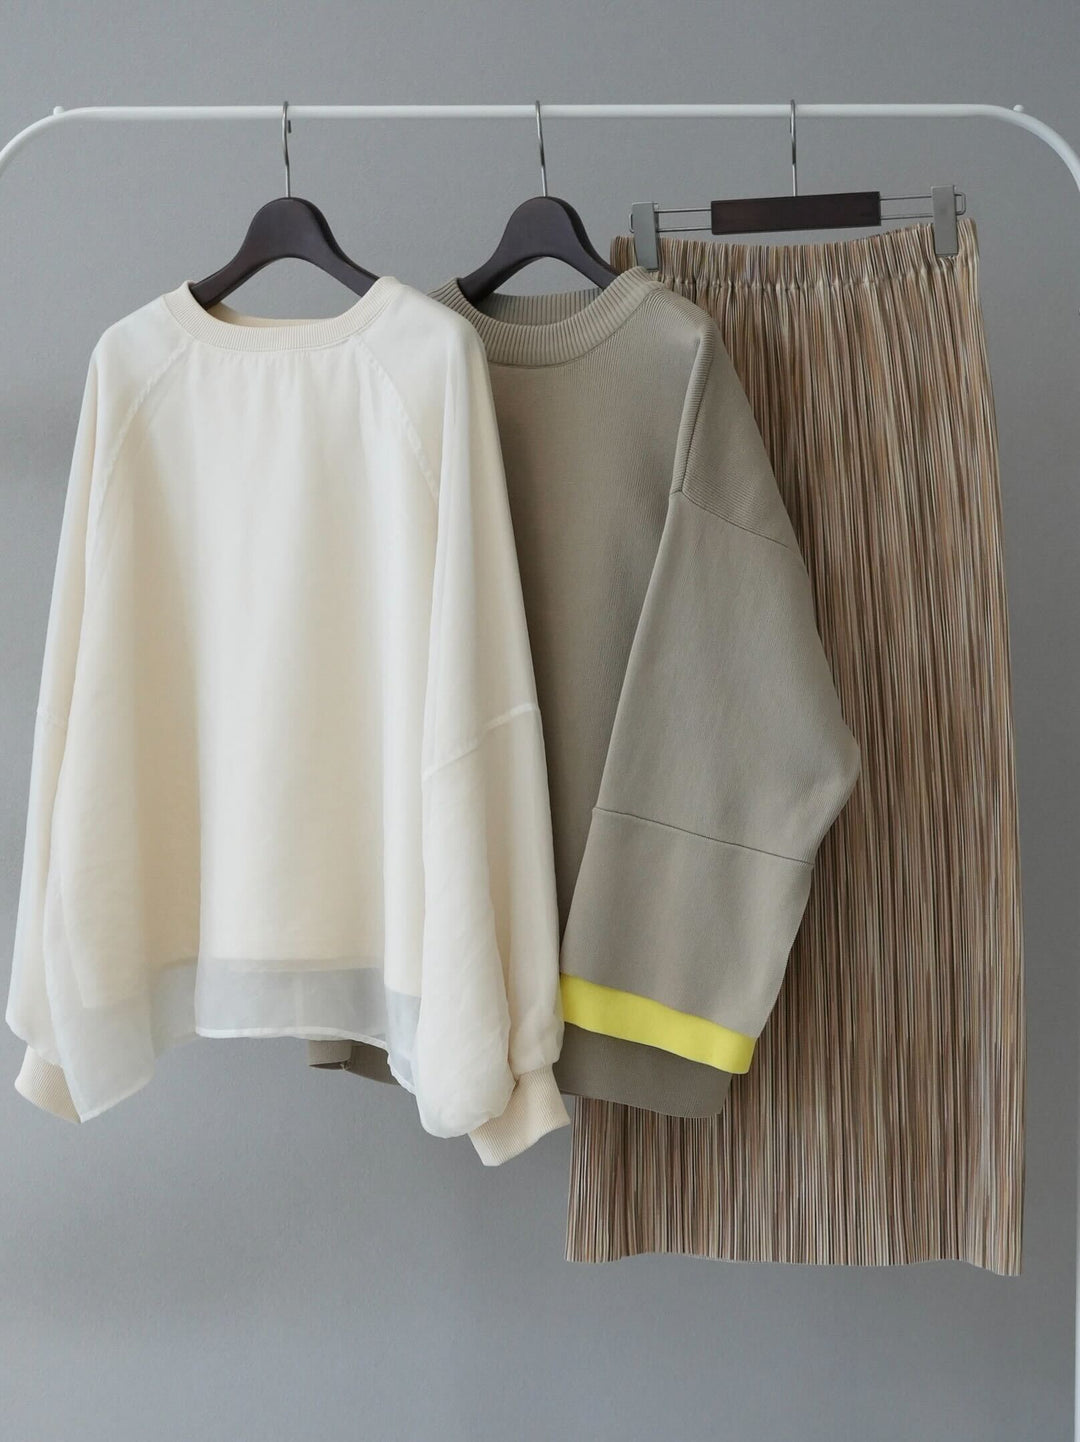 [Mix and match set] [SET] Sheer layered fleece sweatshirt pullover + color-coordinated sleeve Milano rib knit pullover + multi-color I-line pleated skirt (3 sets)